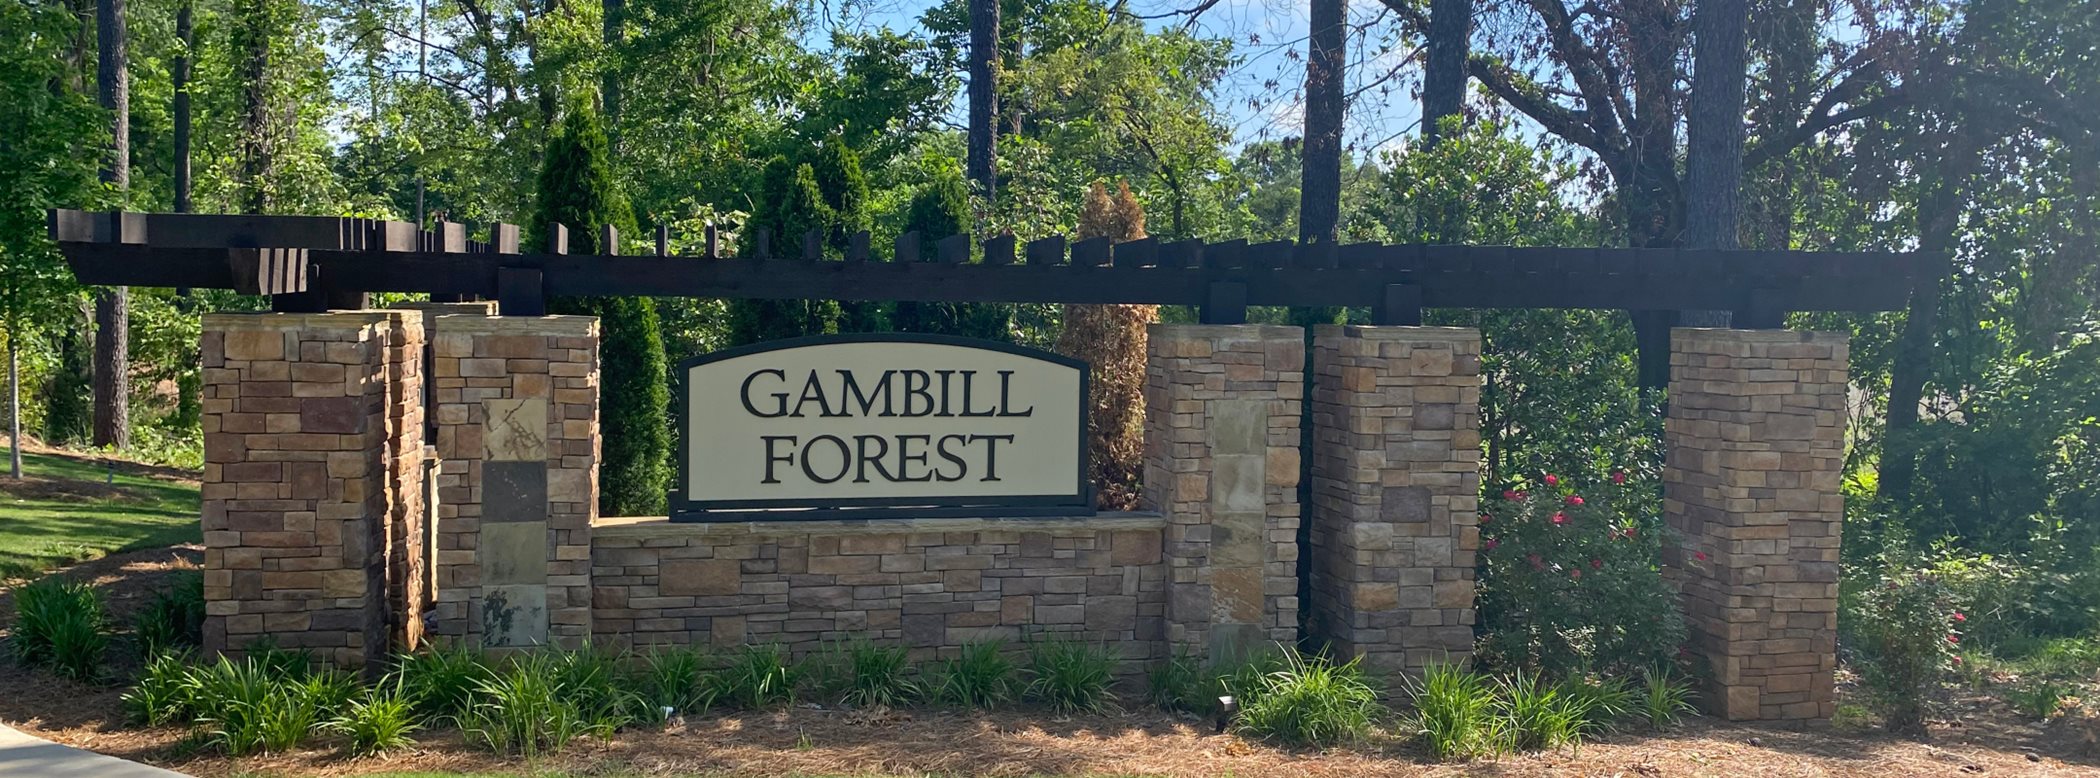 Gambill Forest